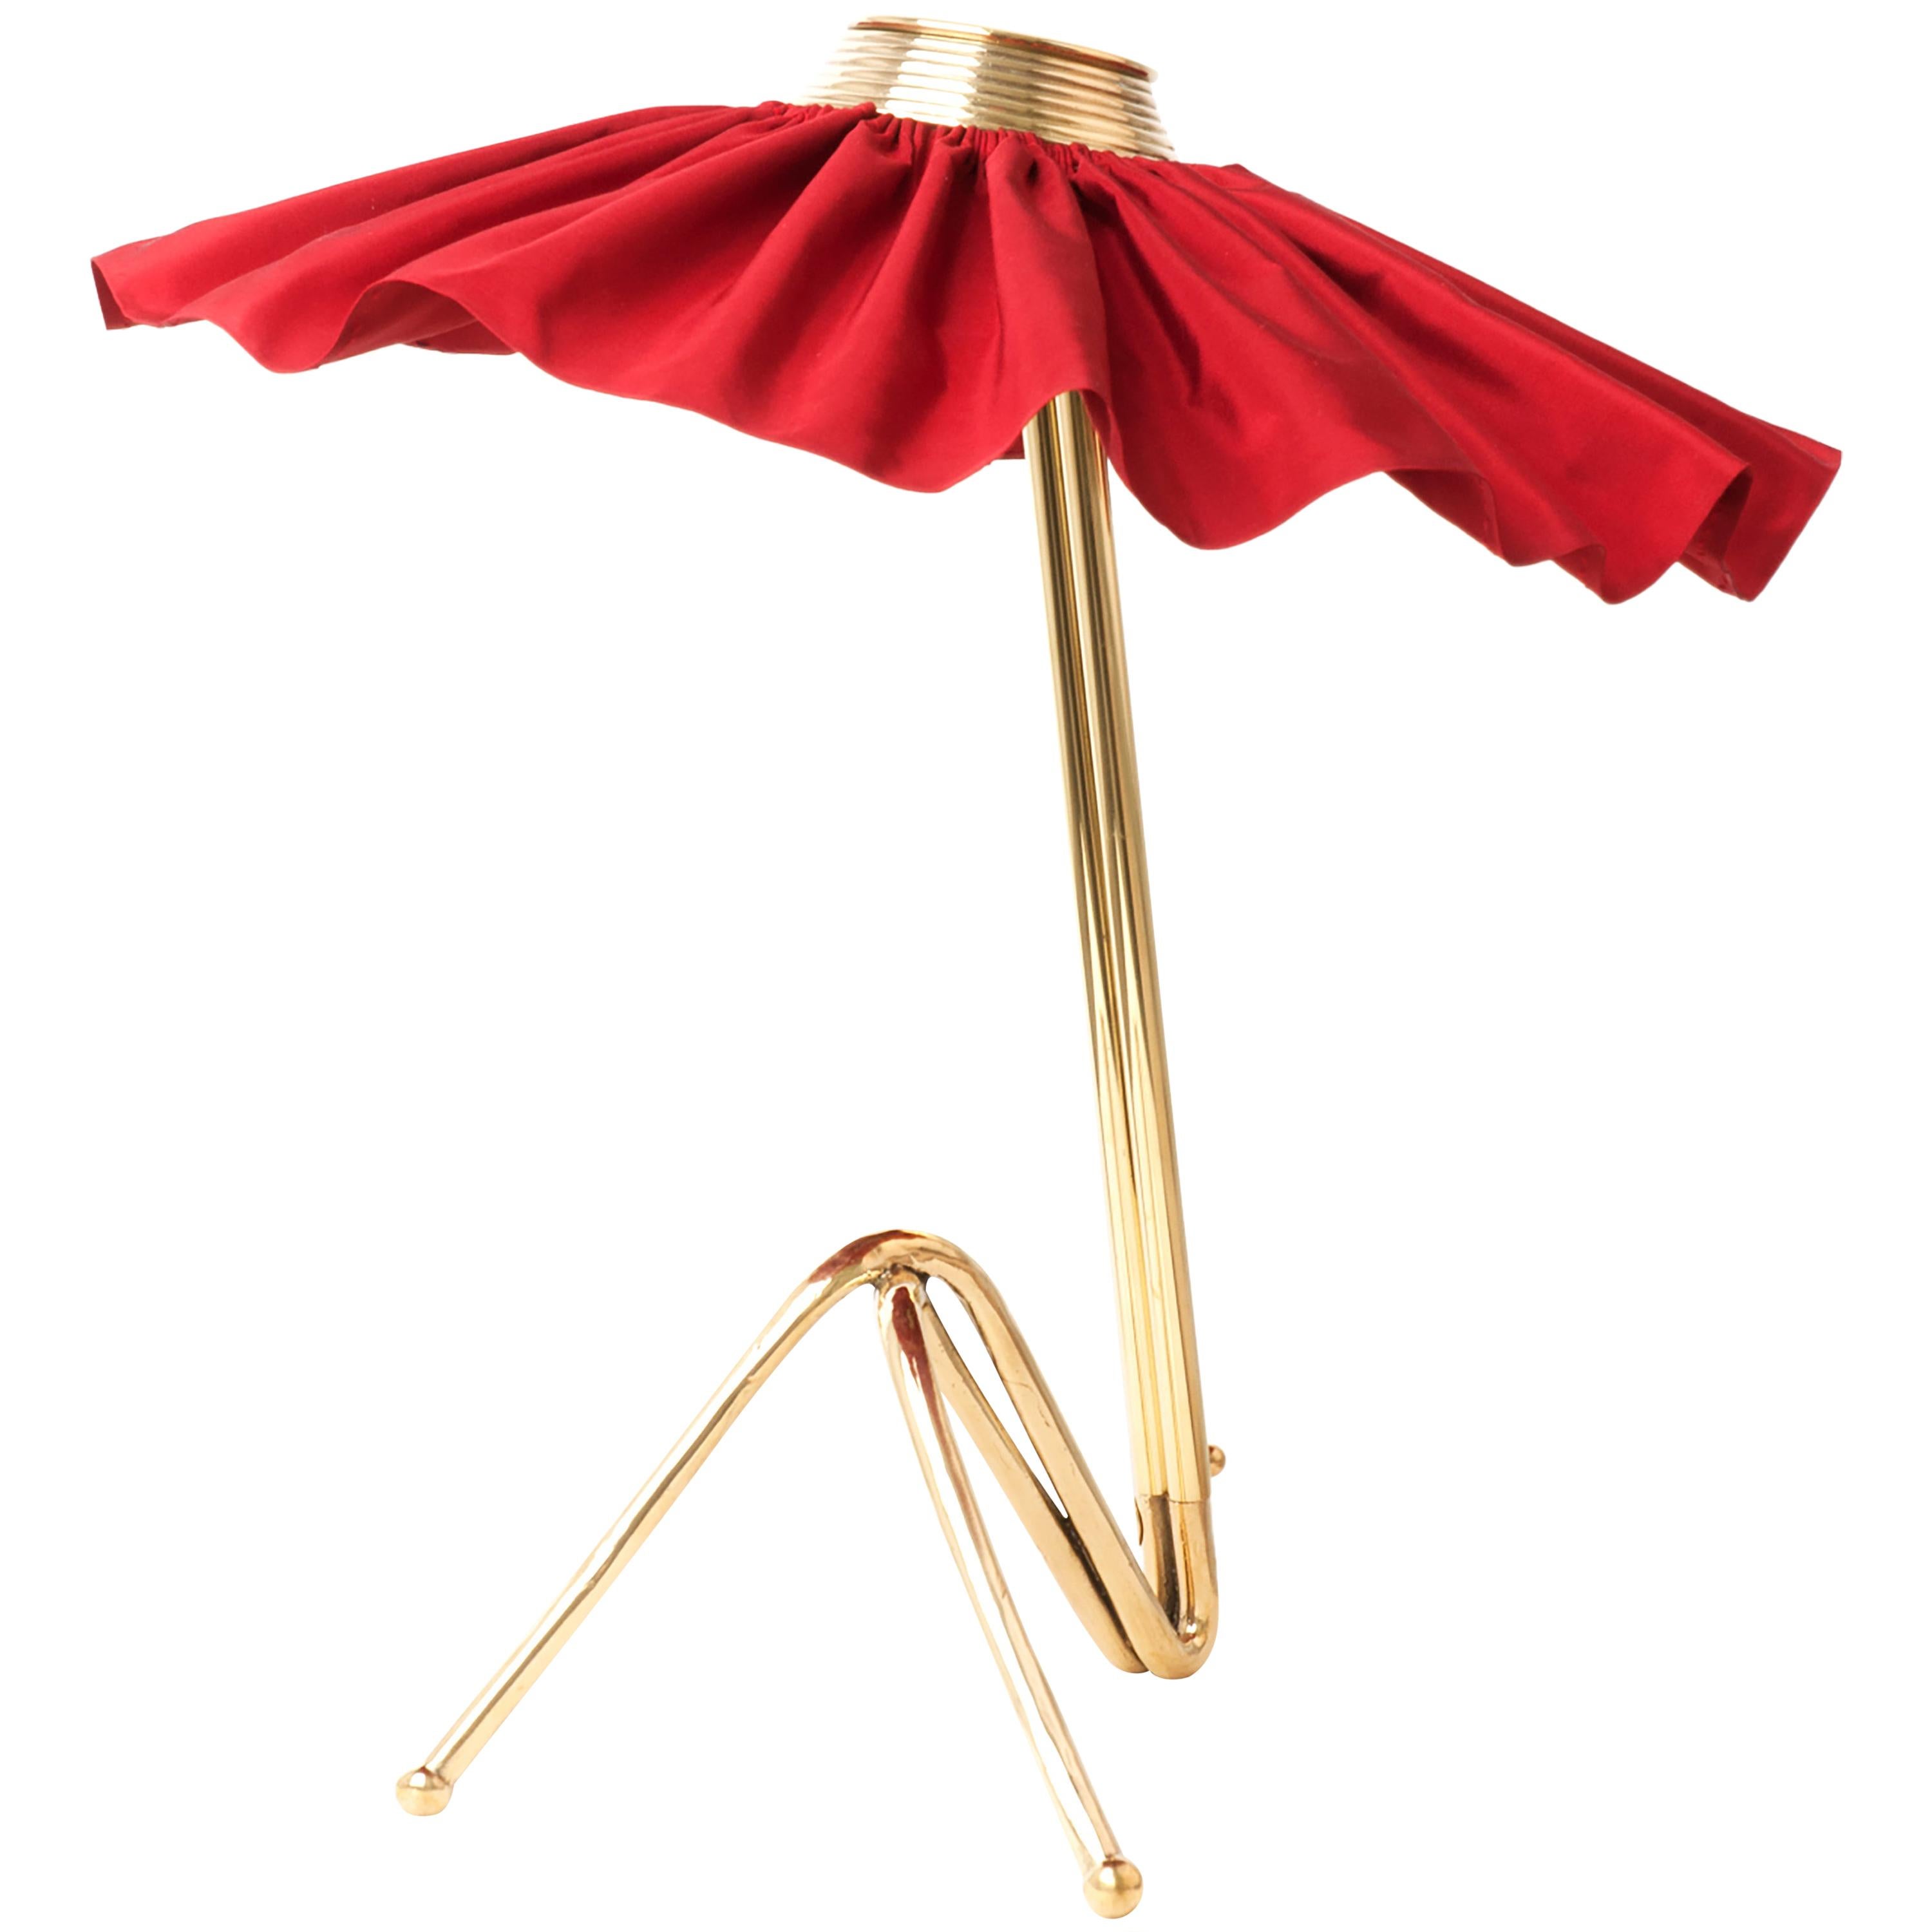 Freevolle Sculpture Table Lamp, cast melted Brass Body, red passion Taffeta